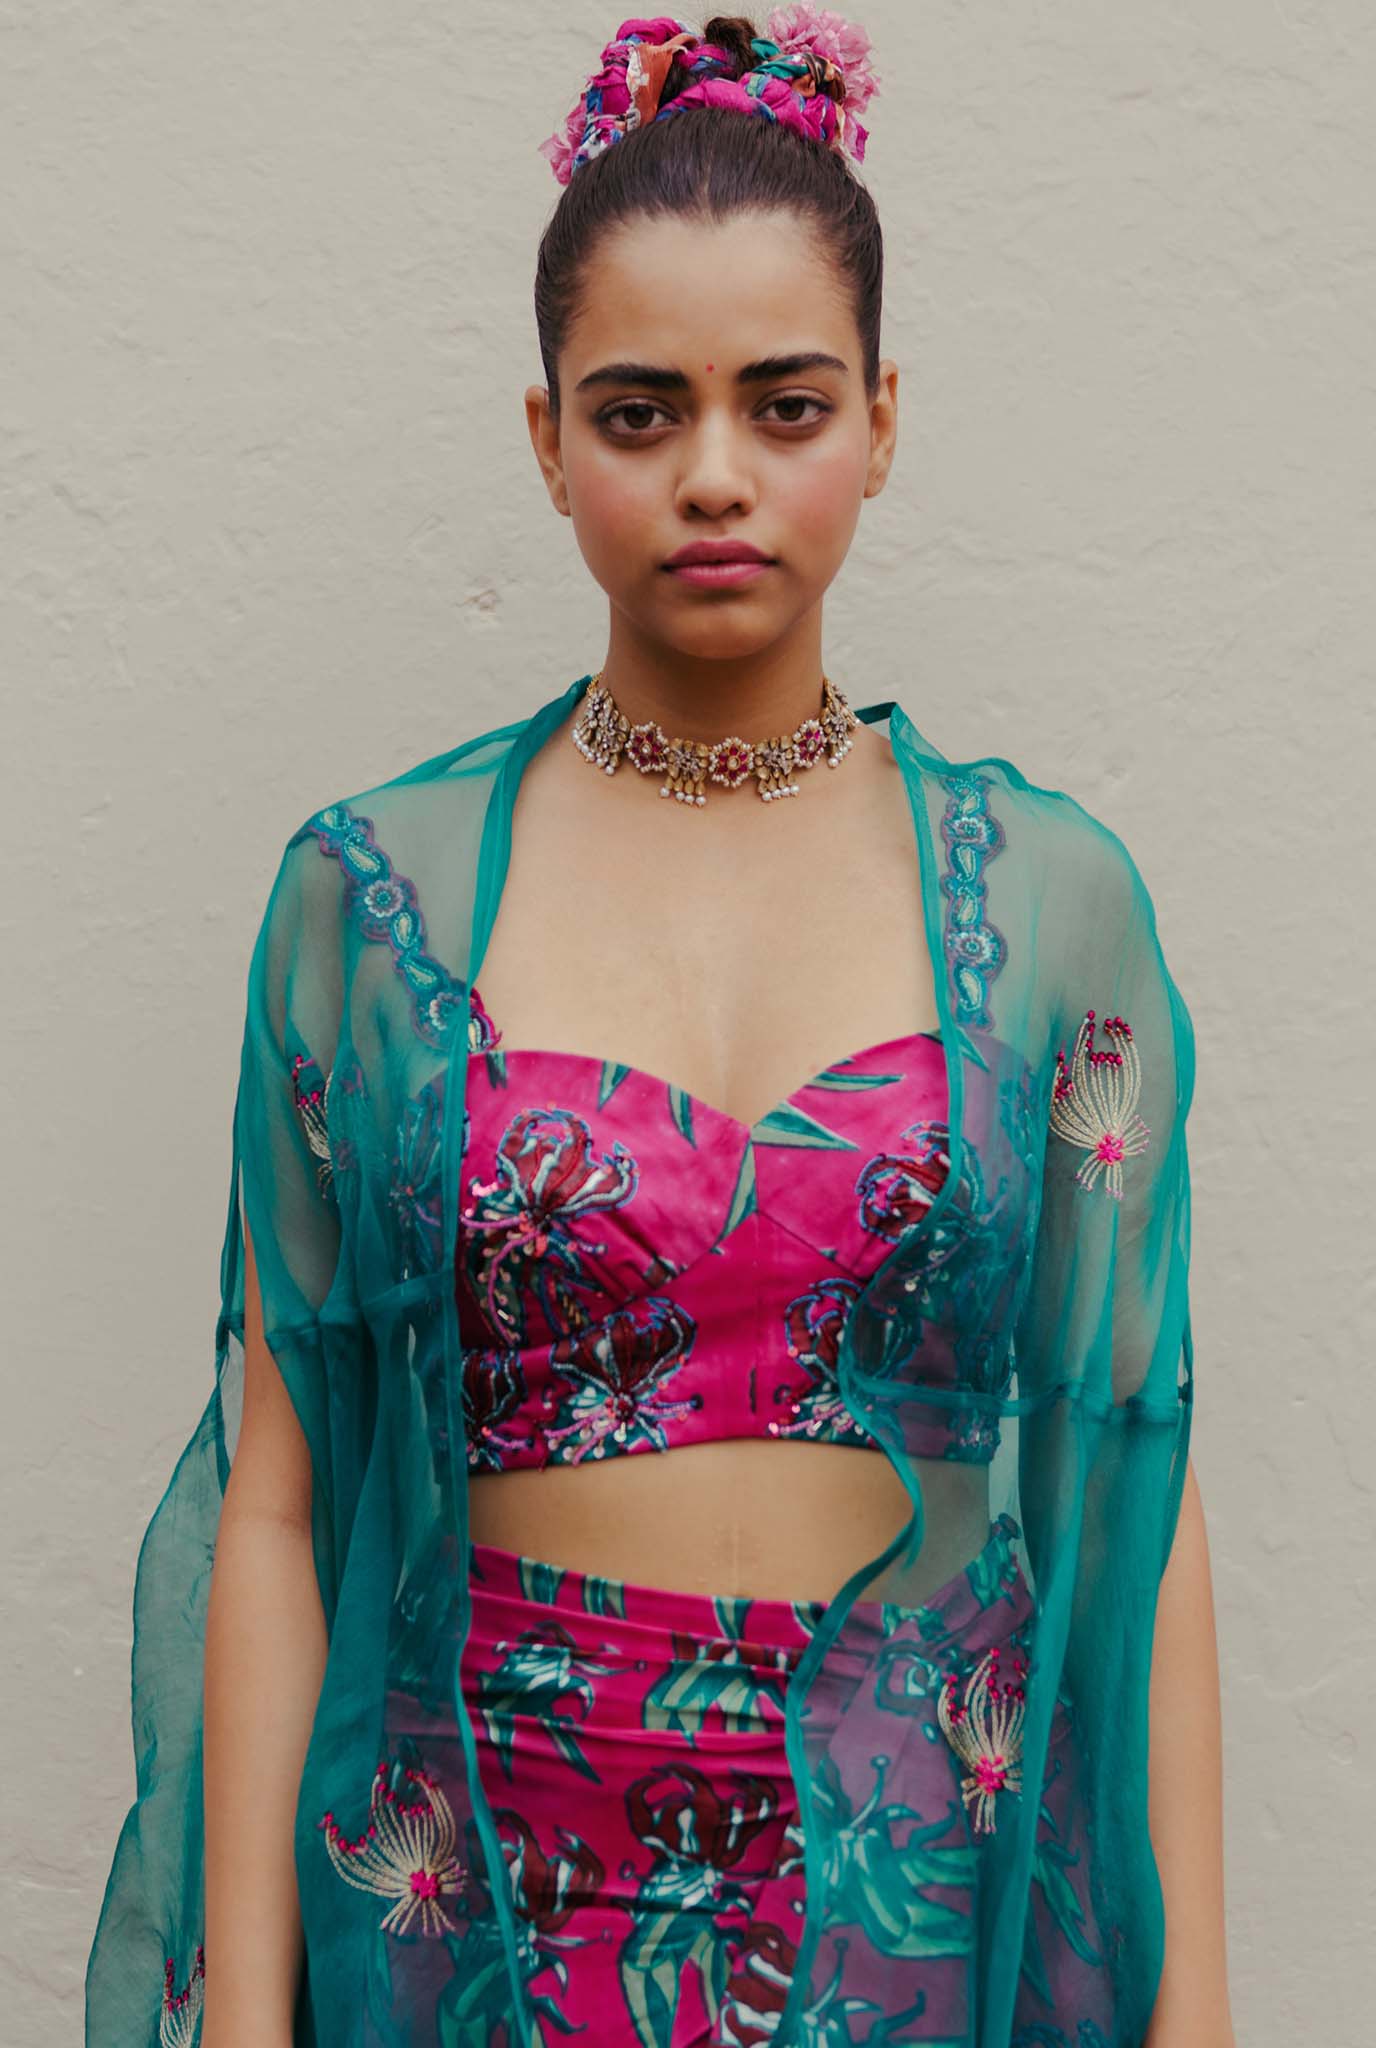 The-Jodi-Life-silk-magenta-sustainable-handcrafted-embroidery-blouse-skirt-cape